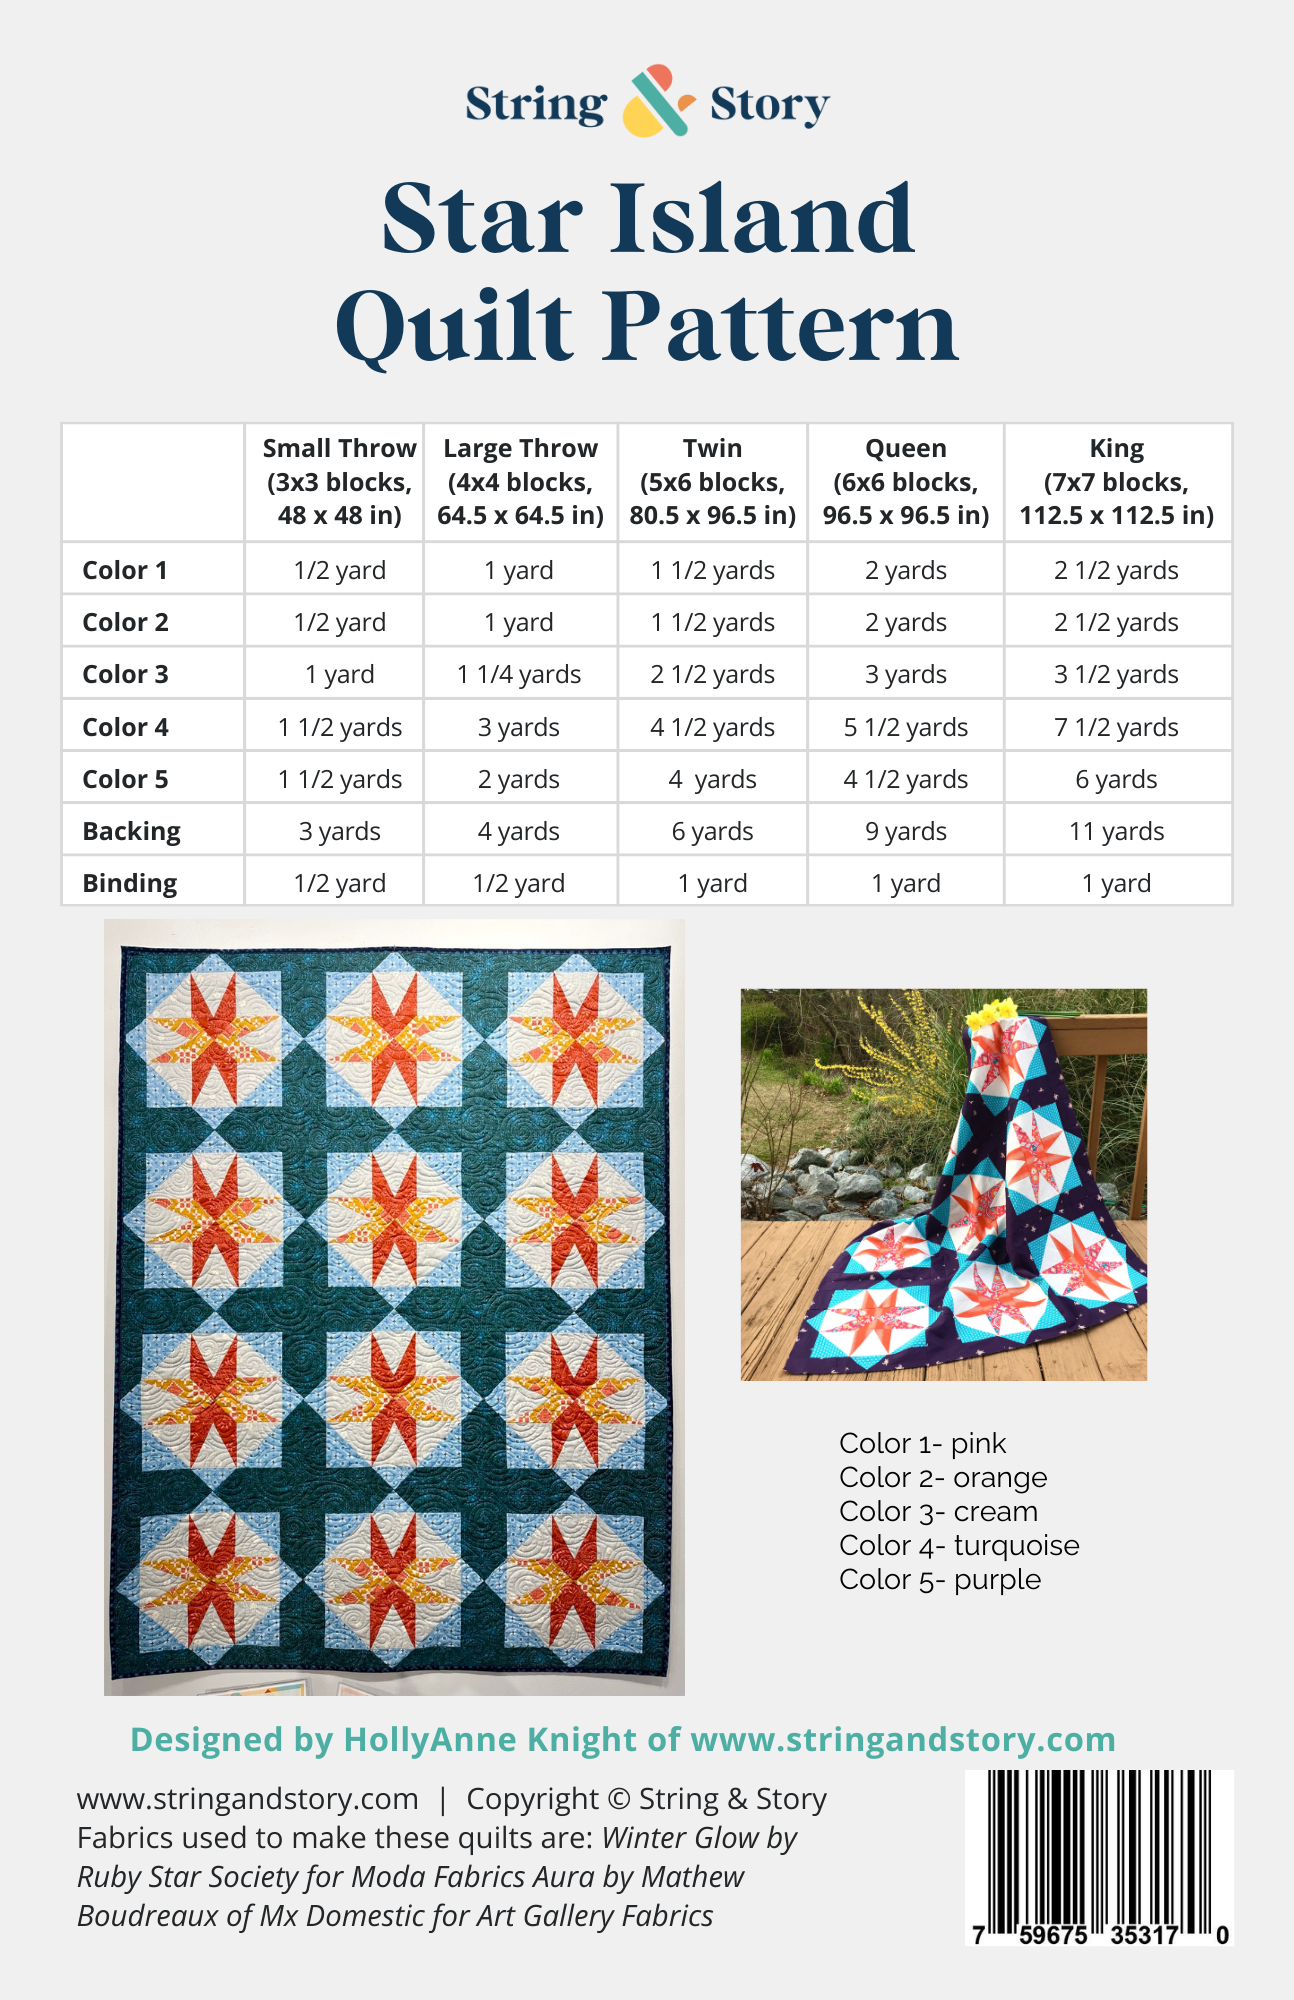 Patterns: Star Island Quilt - DIGITAL PATTERN by HollyAnne Knight for String & Story